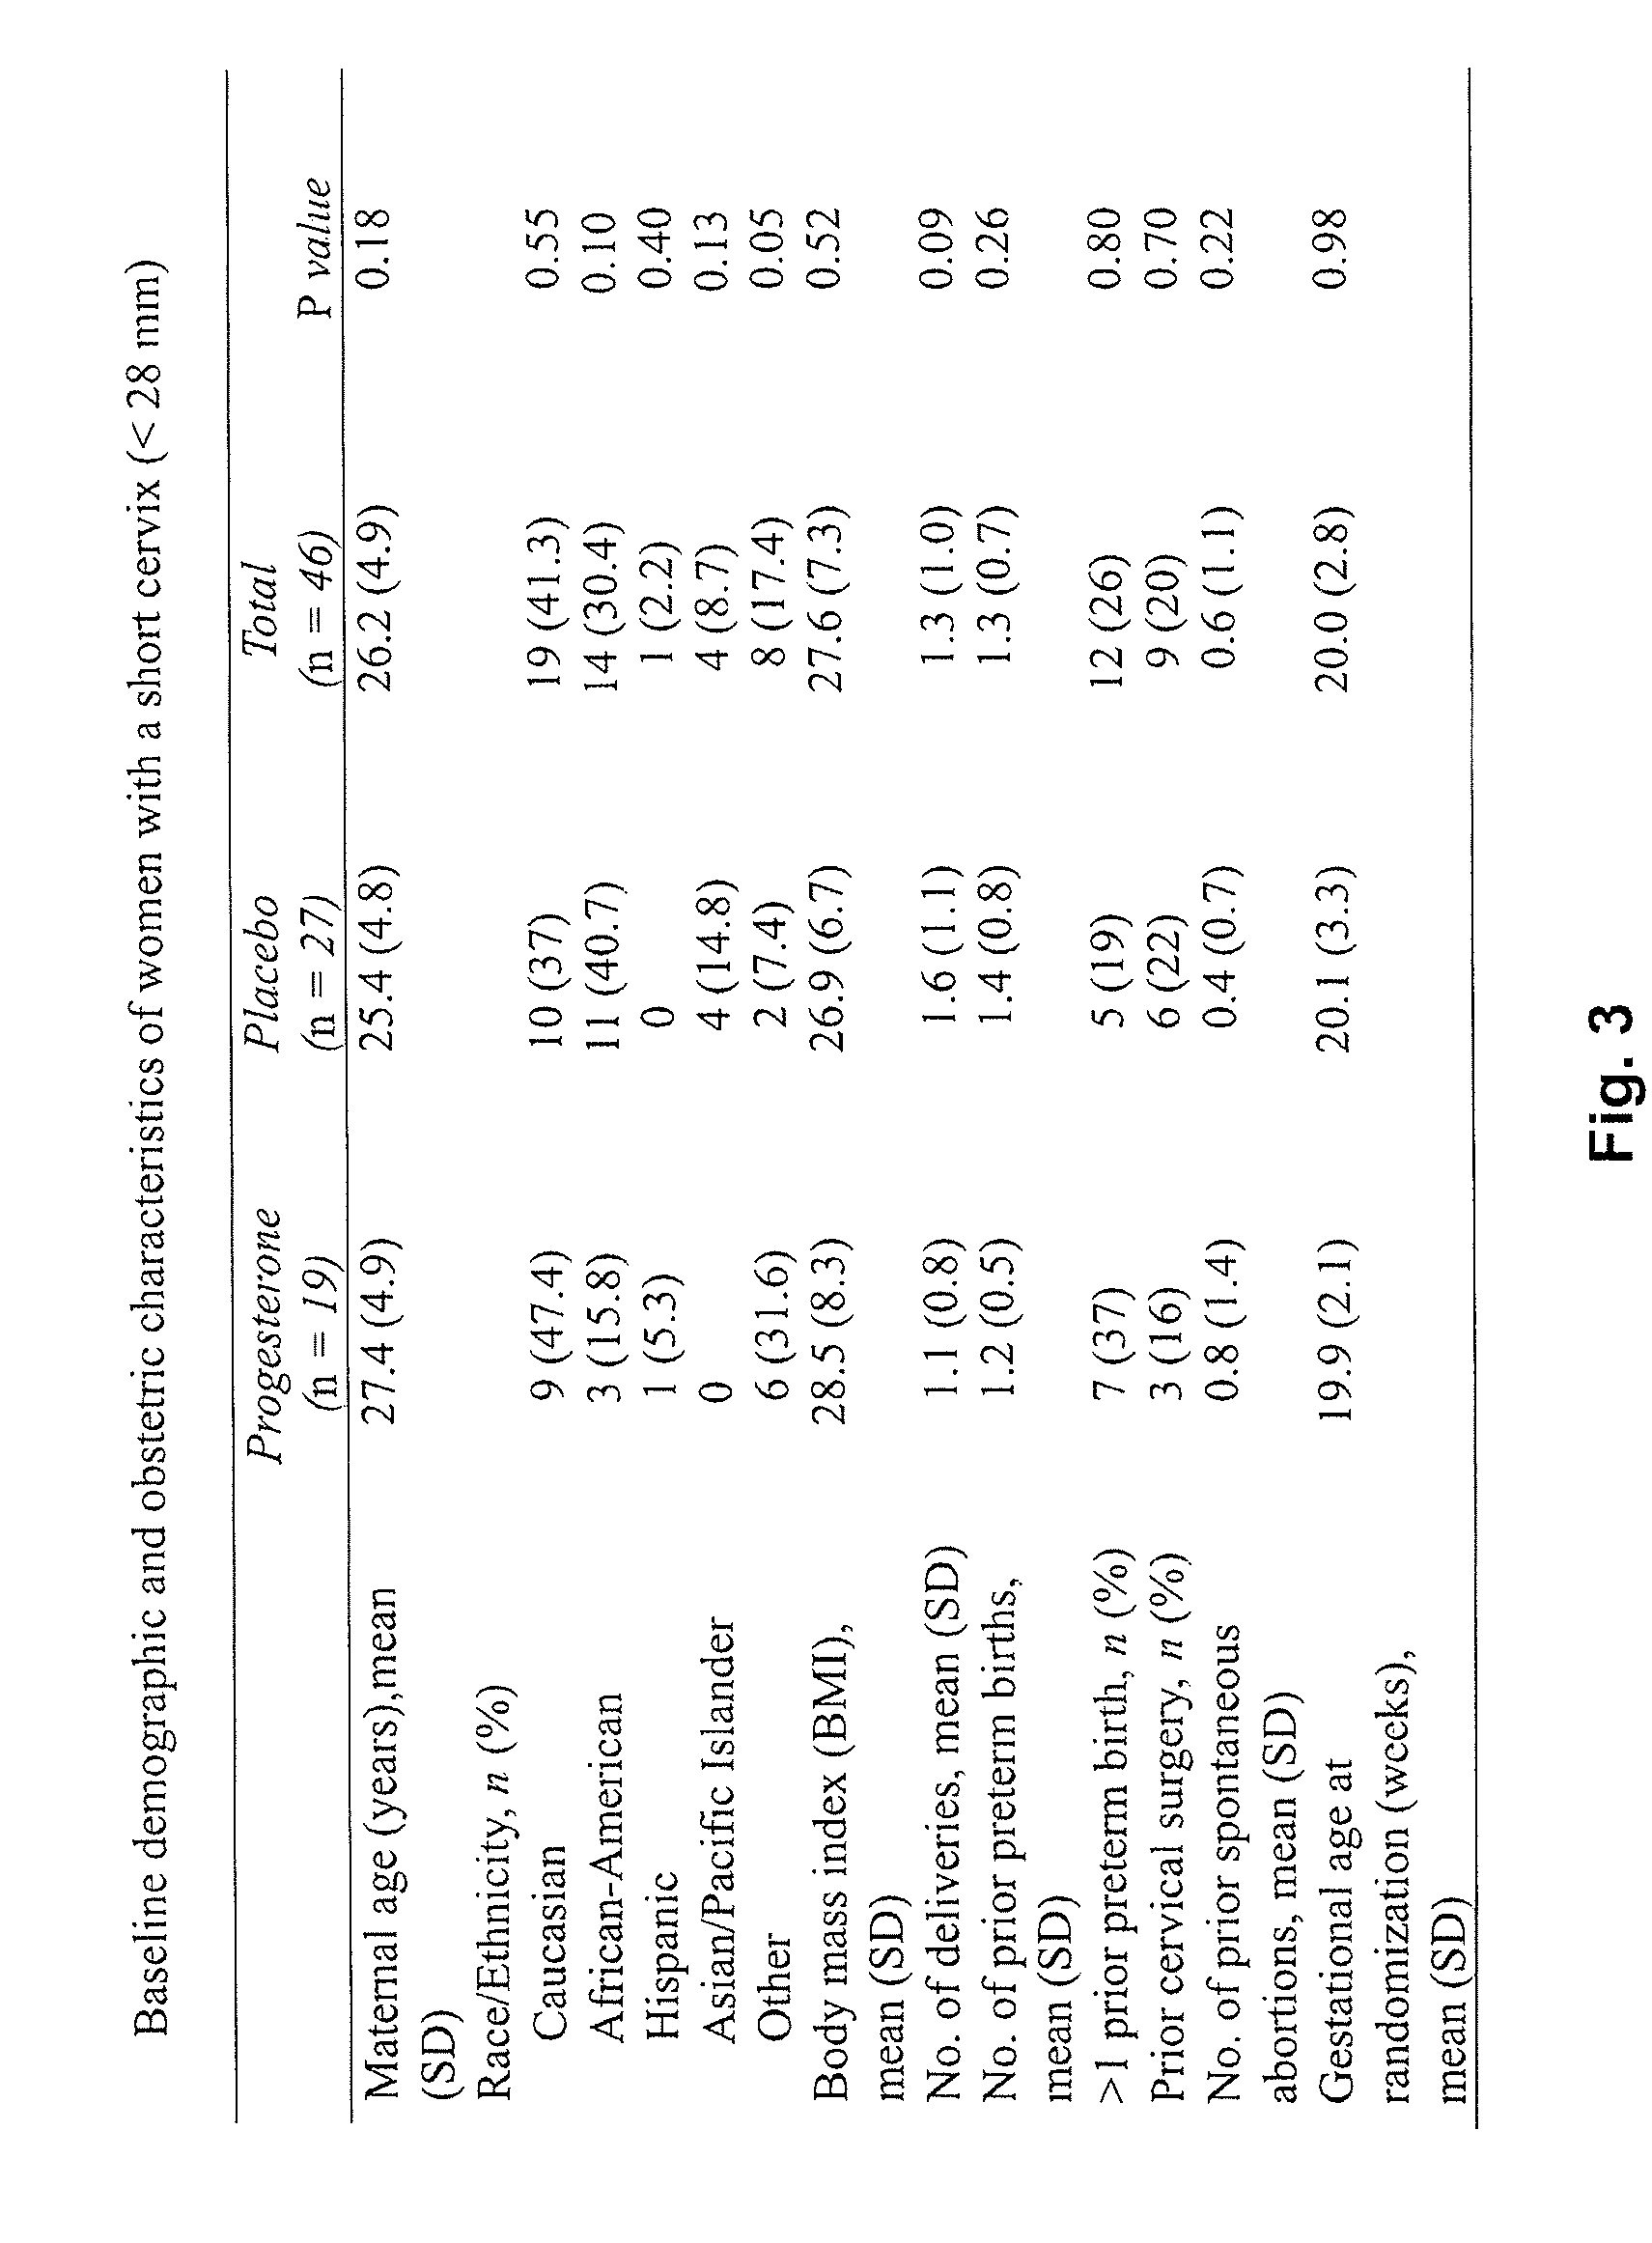 Progesterone for the treatment or prevention of spontaneous preterm birth